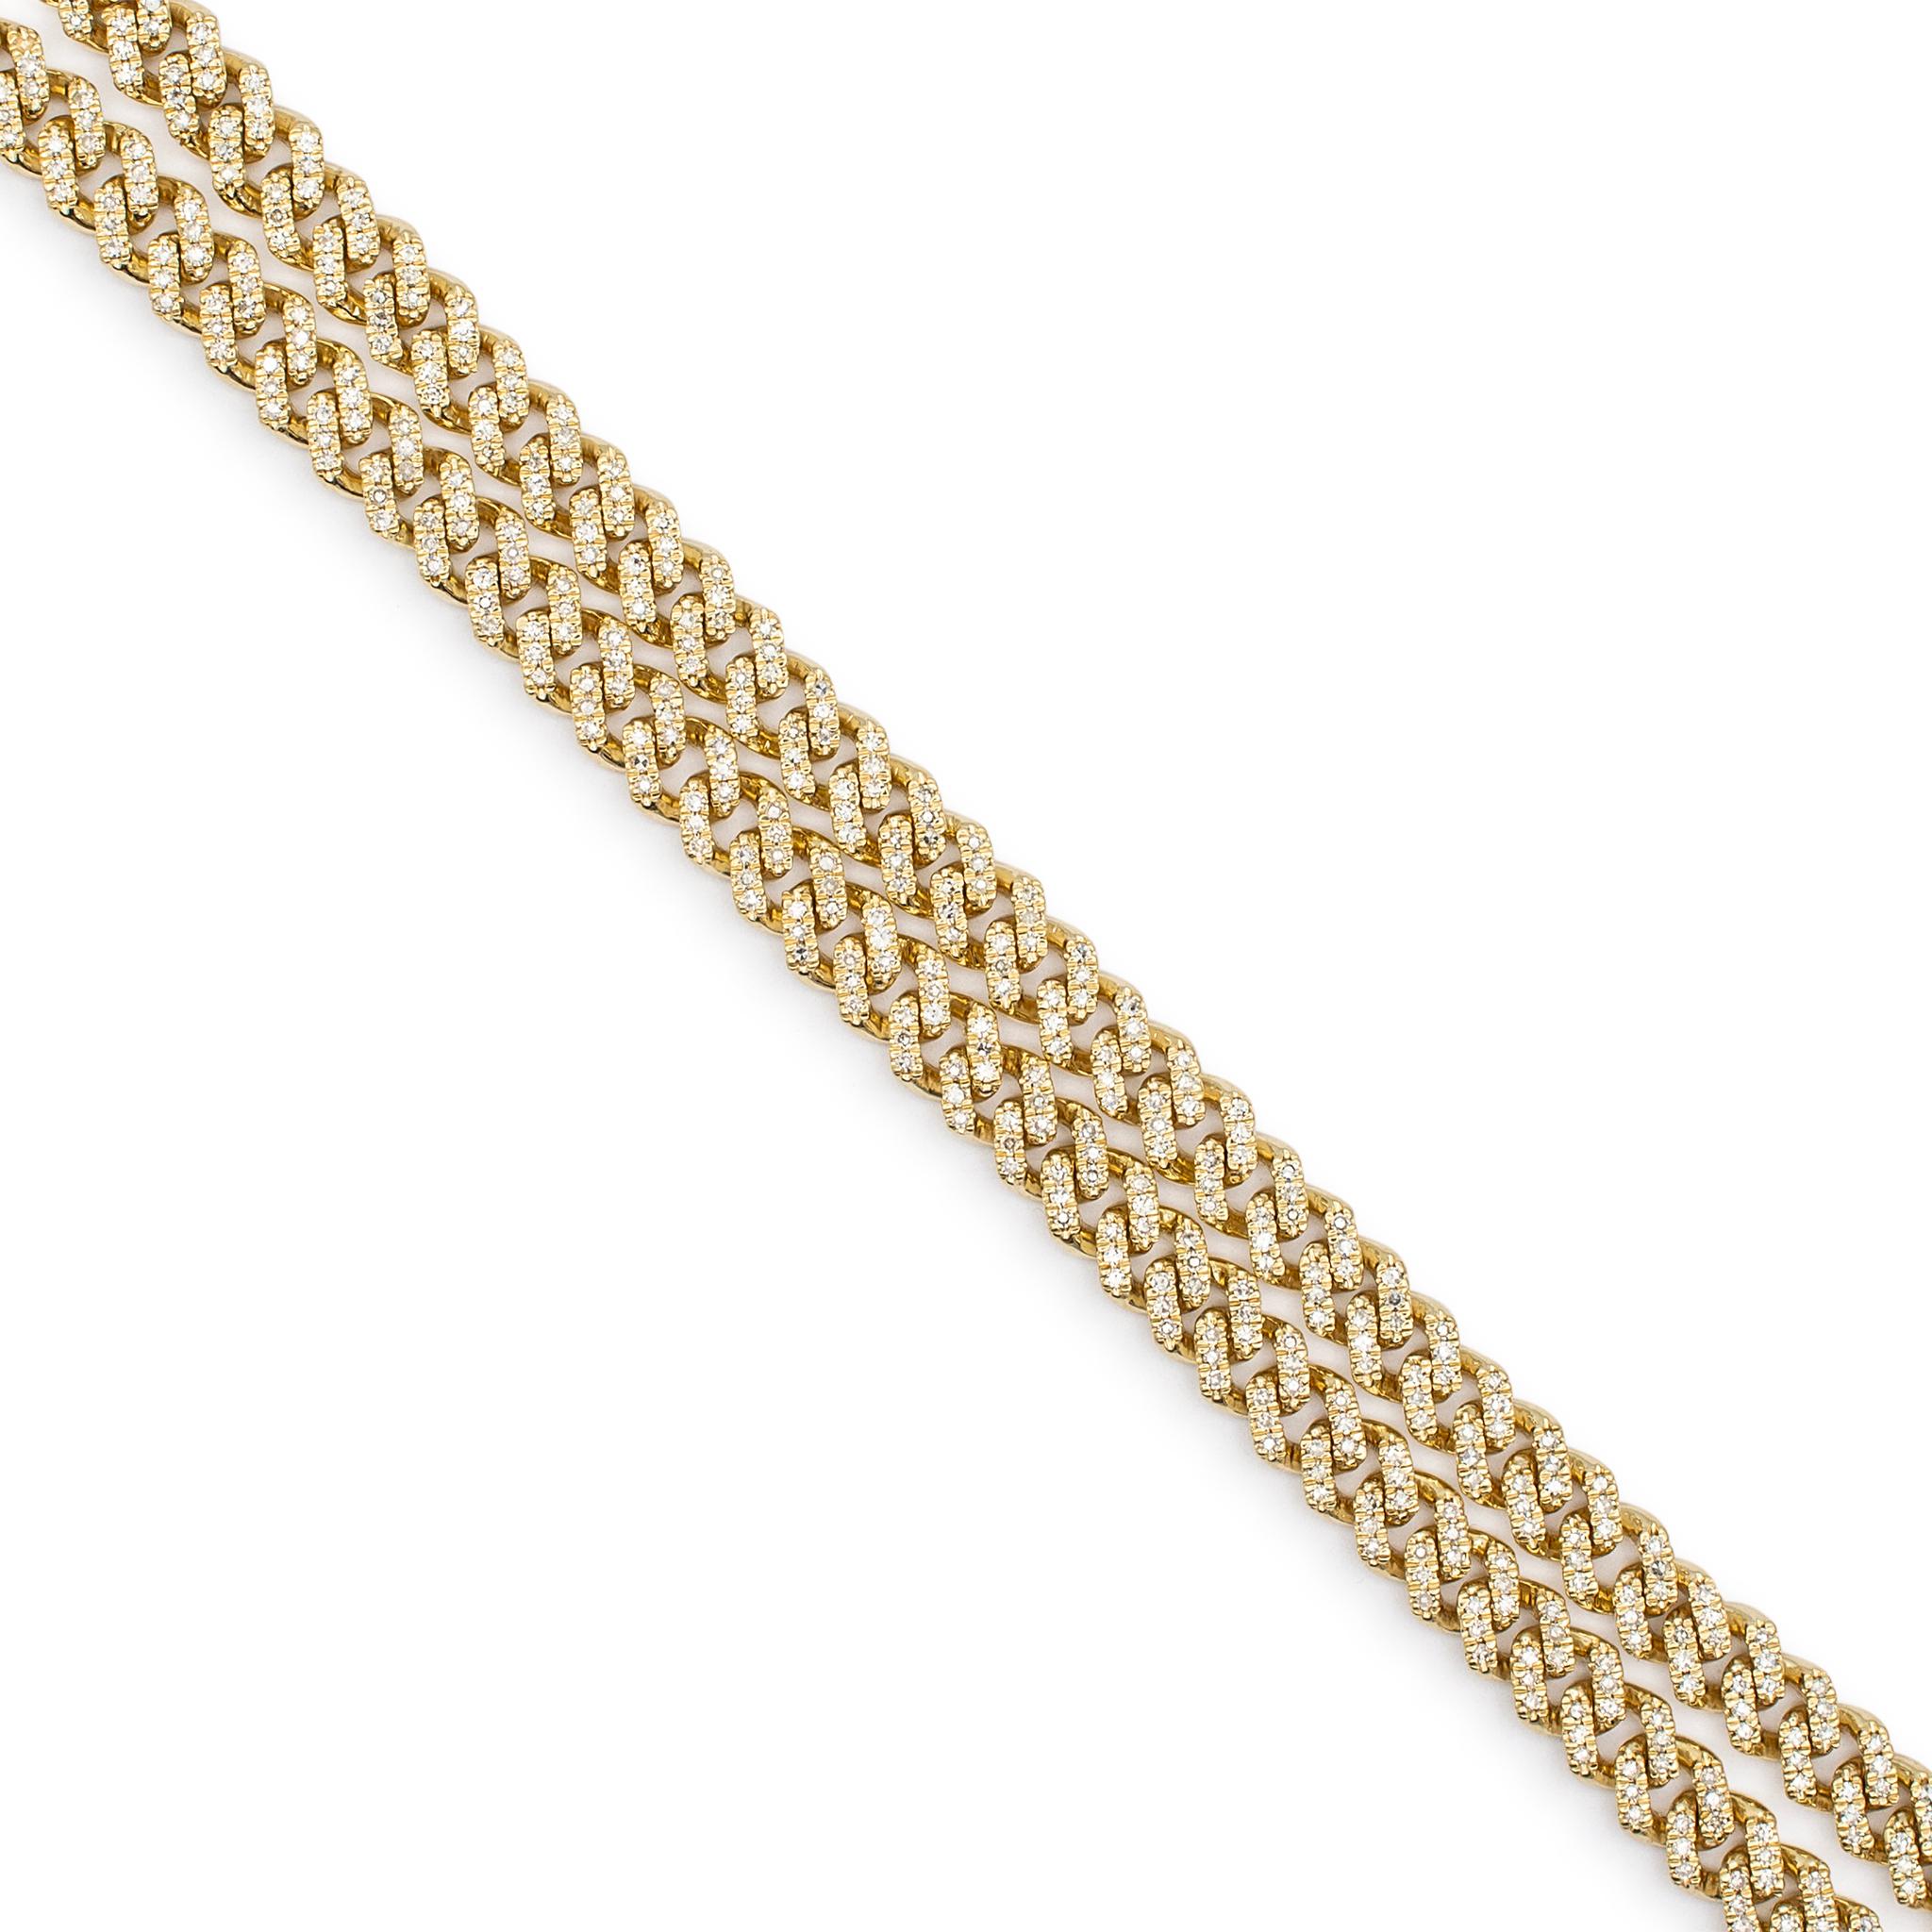 Gender: Ladies

Metal Type: 14K White Gold

Length: 22.00 Inches

Width: 5.80 mm

Weight: 35.94 grams
Ladies 10K yellow gold cuban link chain. The metal was tested and determined to be 10K yellow gold.
Pre-owned in excellent condition. Might shows